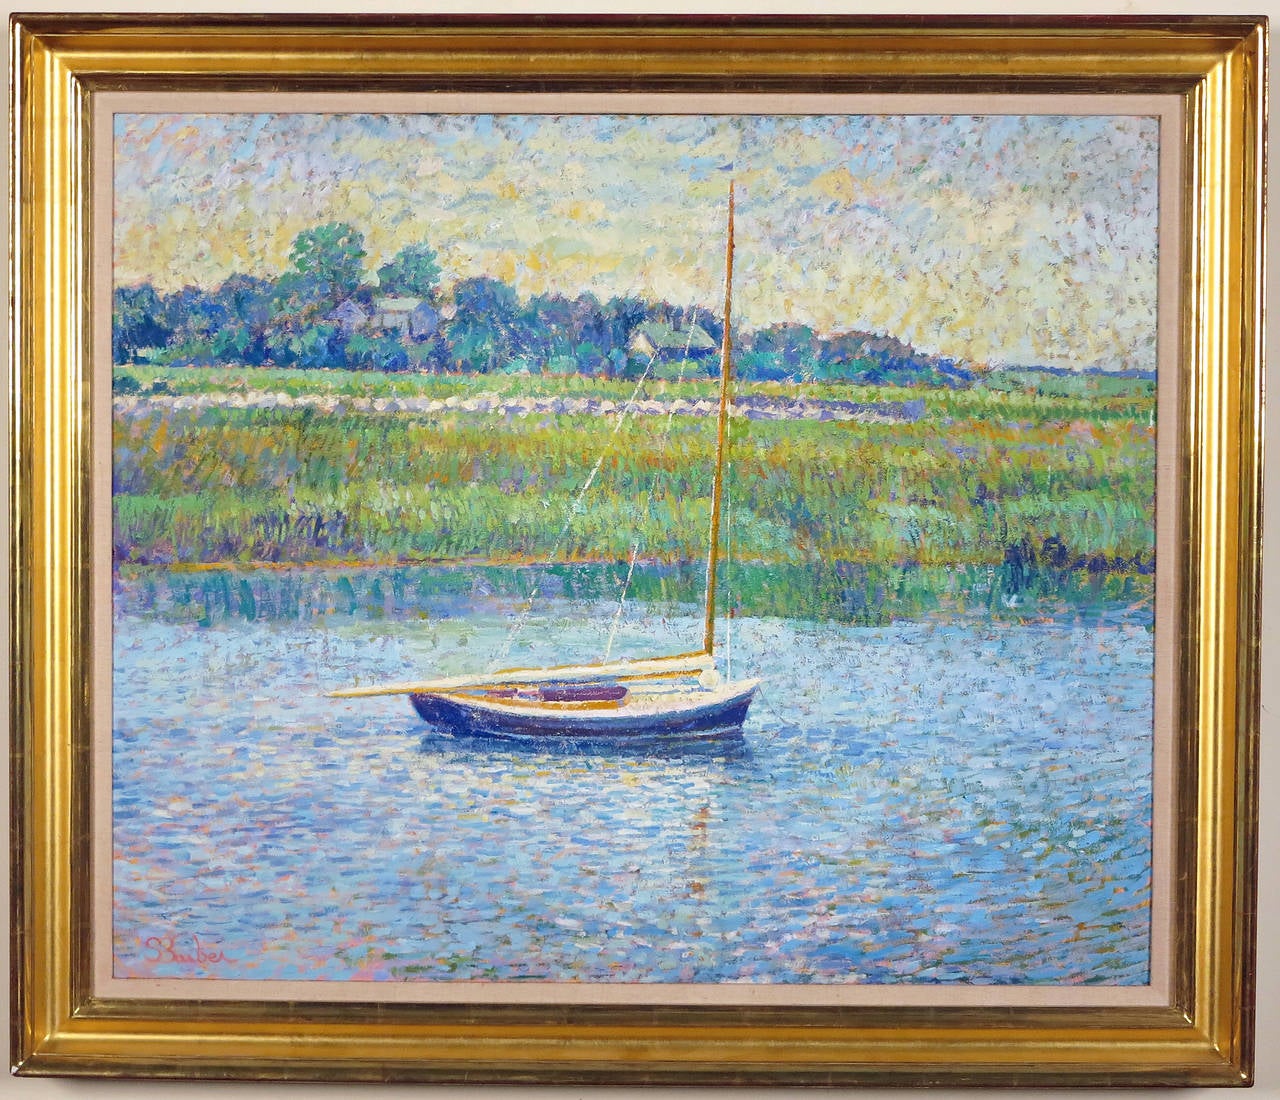 Sam Barber 
American 20th Century
Millway Boat

Oil on canvas
Signed lower left
30 by 36 in.  W/frame 36 by 42 in.

In an exhibition booklet complied by Wally Findlay Galleries in 1989, it was noted that Mr. Barber is a resident of Cape Cod,